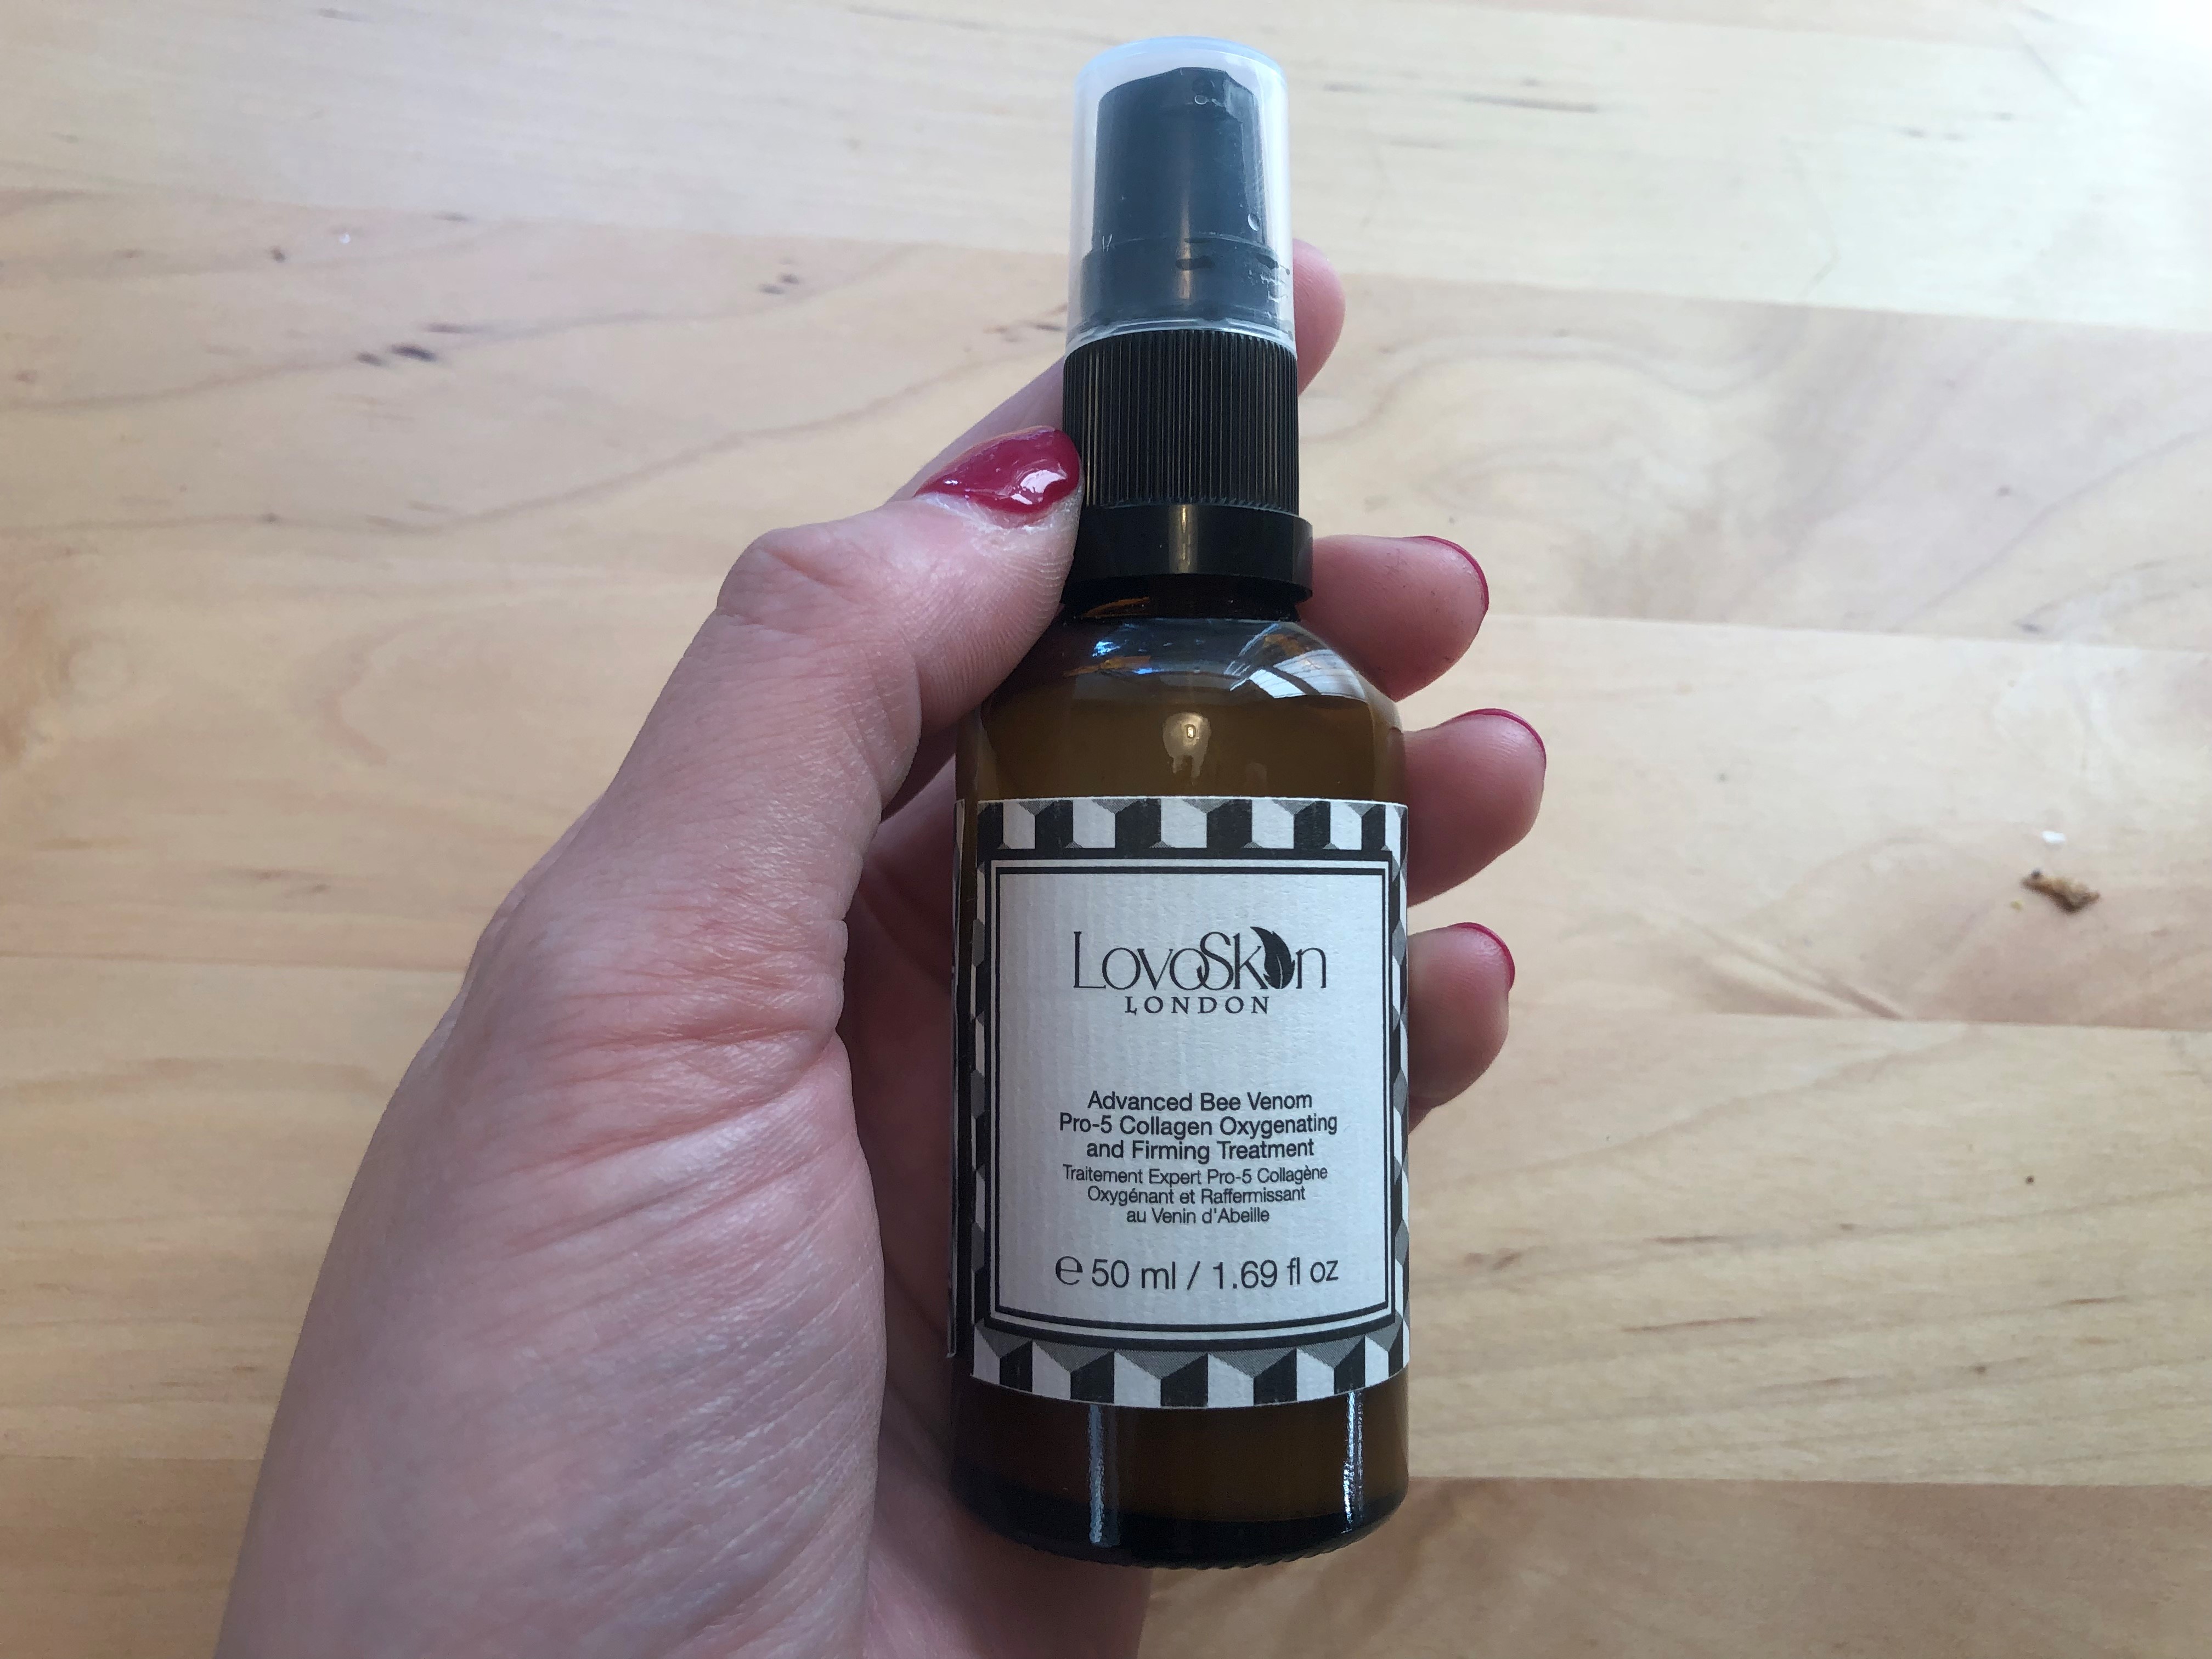 Advanced Bee Venom Collagen Oxygenating and Firming Treatment by LovoSkin London